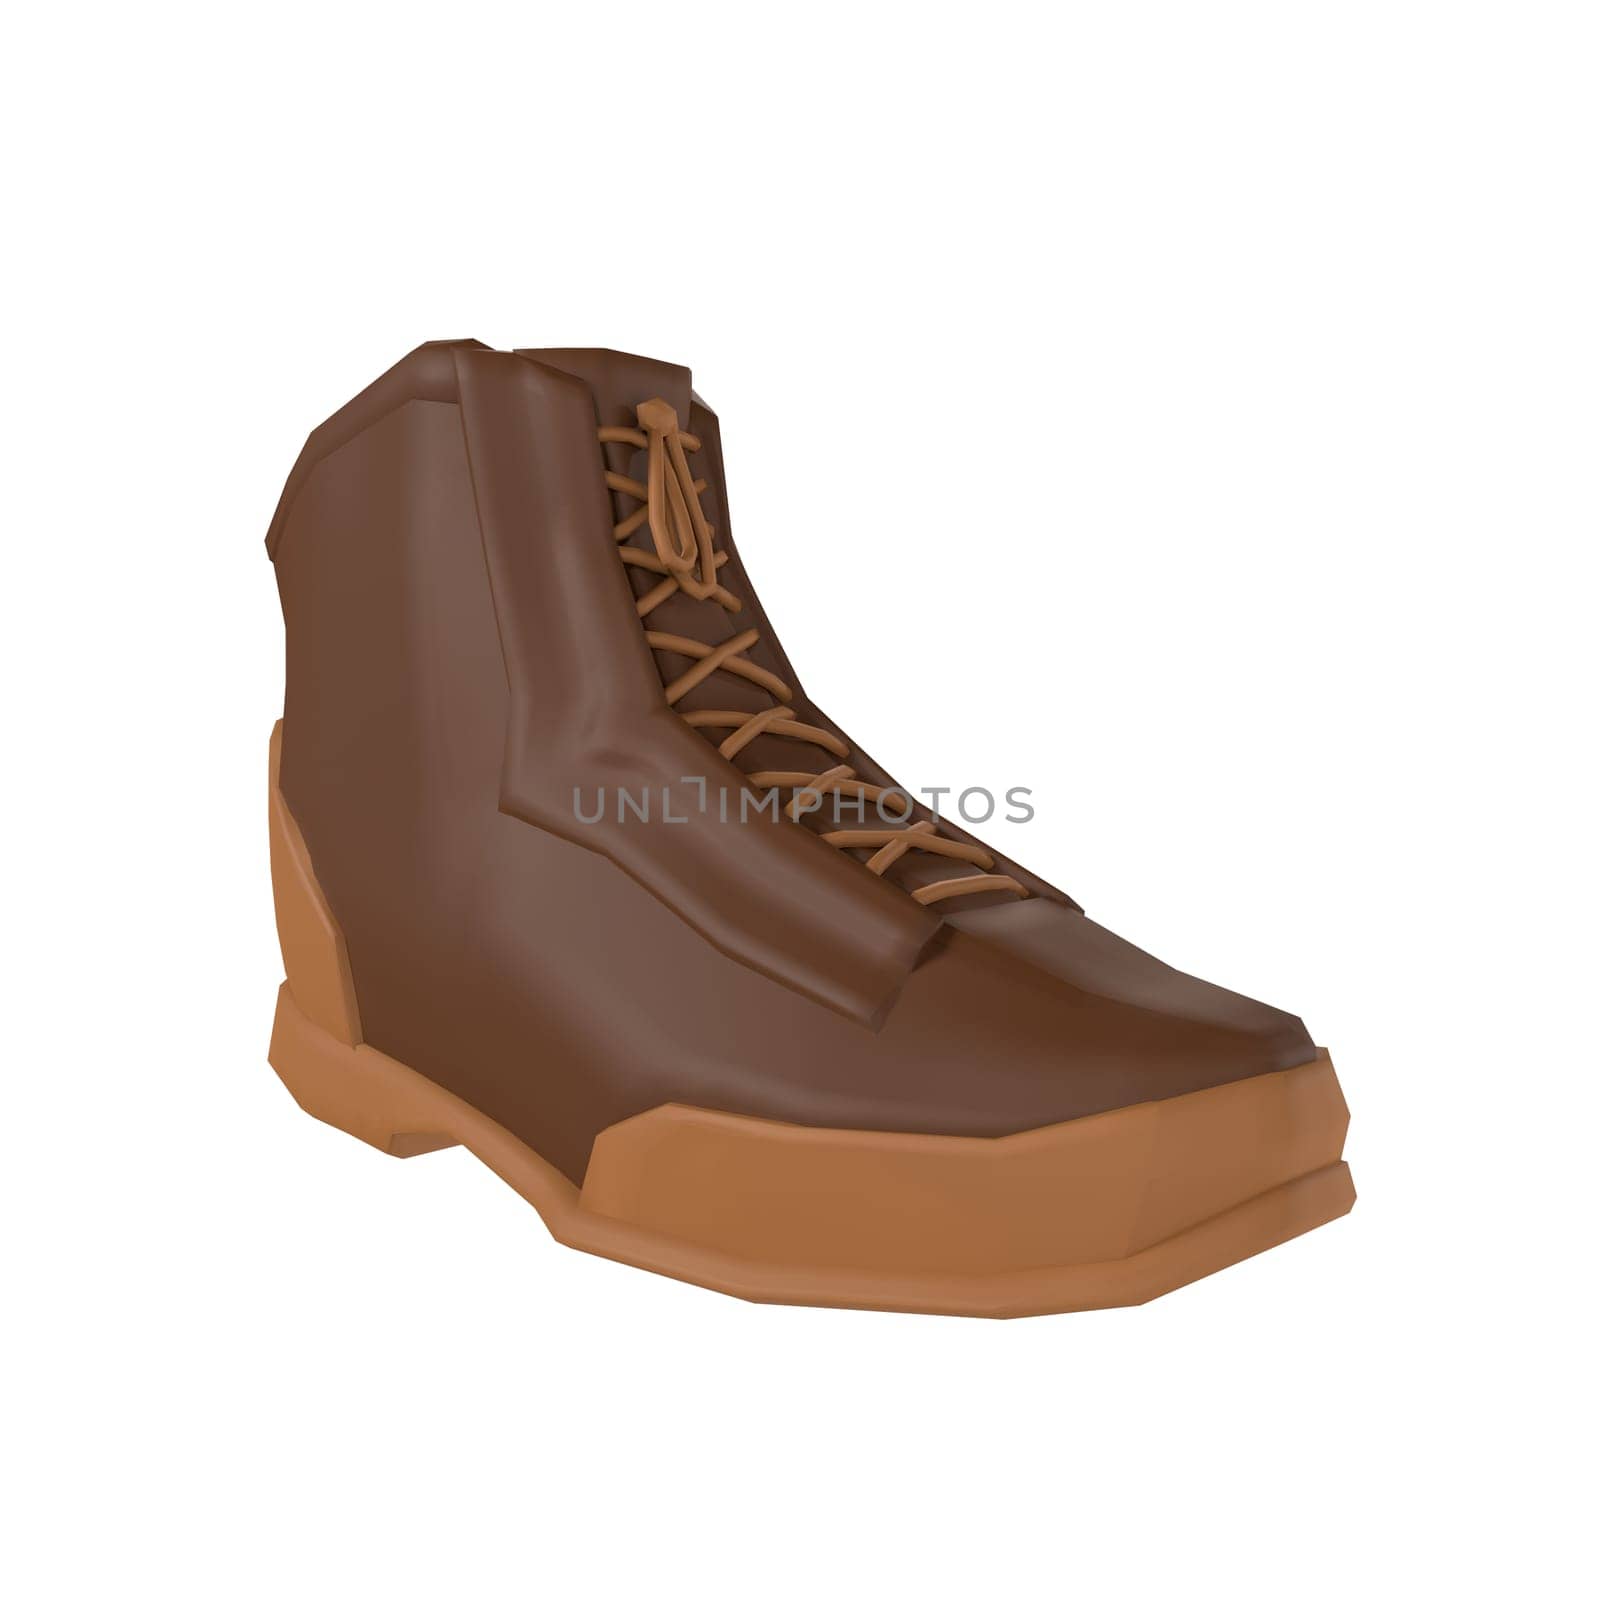 Military Boot isolated on white background. High quality 3d illustration